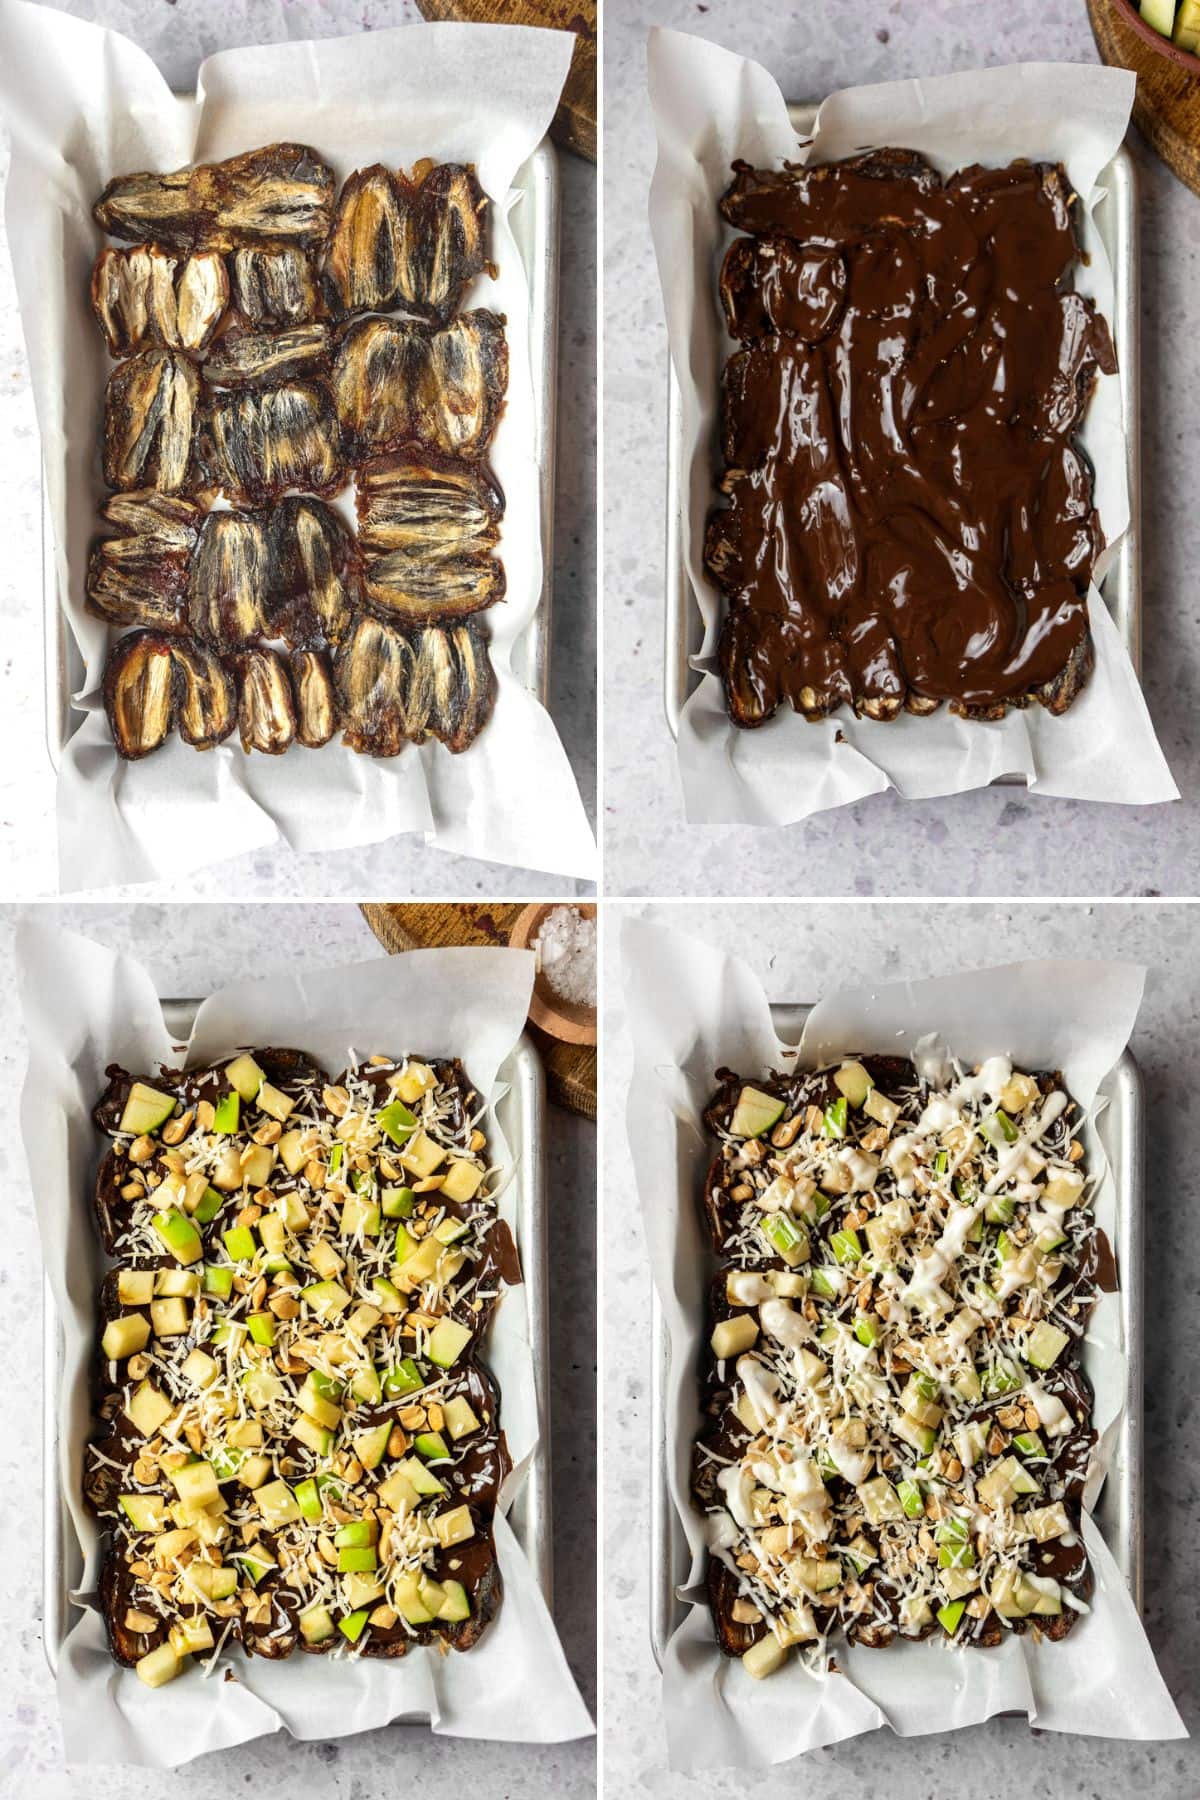 Collage of topping smashed medjool dates with dark chocolate, apples, peanuts, coconut, and a drizzle of white chocolate.